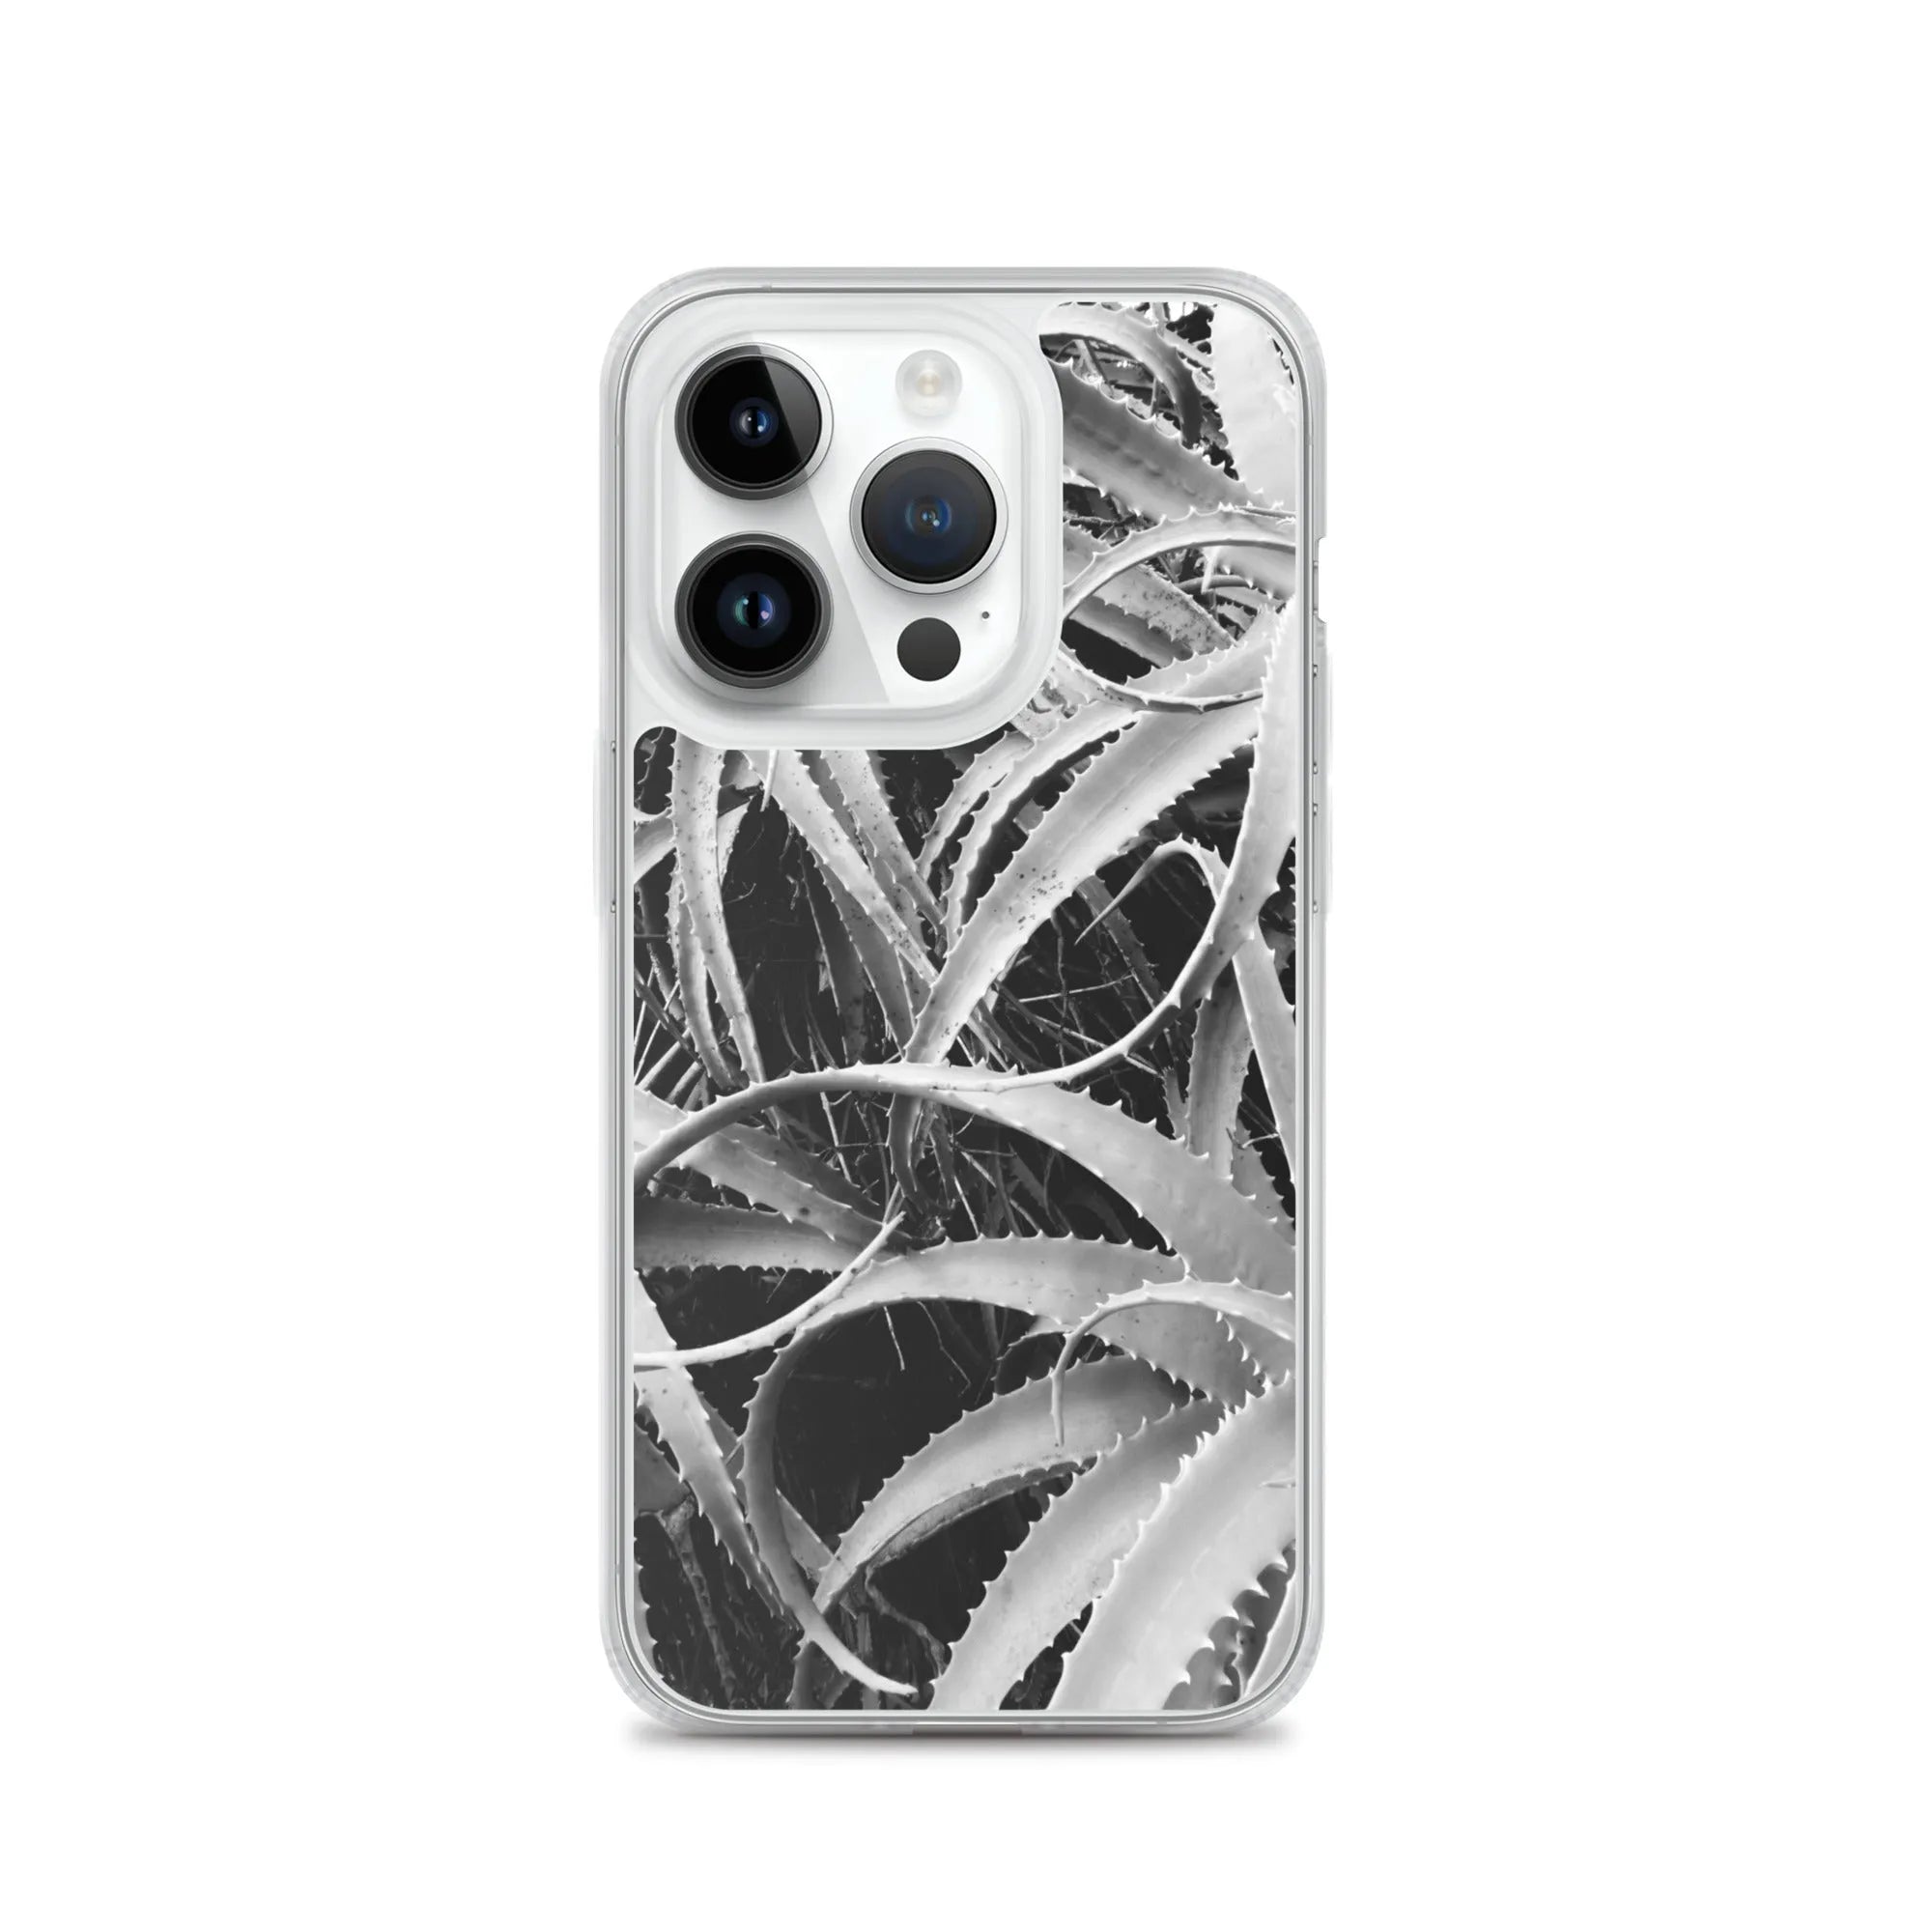 Spiked 2 + Too Botanical Art Iphone Case - Black And White - Iphone 14 Pro - Mobile Phone Cases - Aesthetic Art